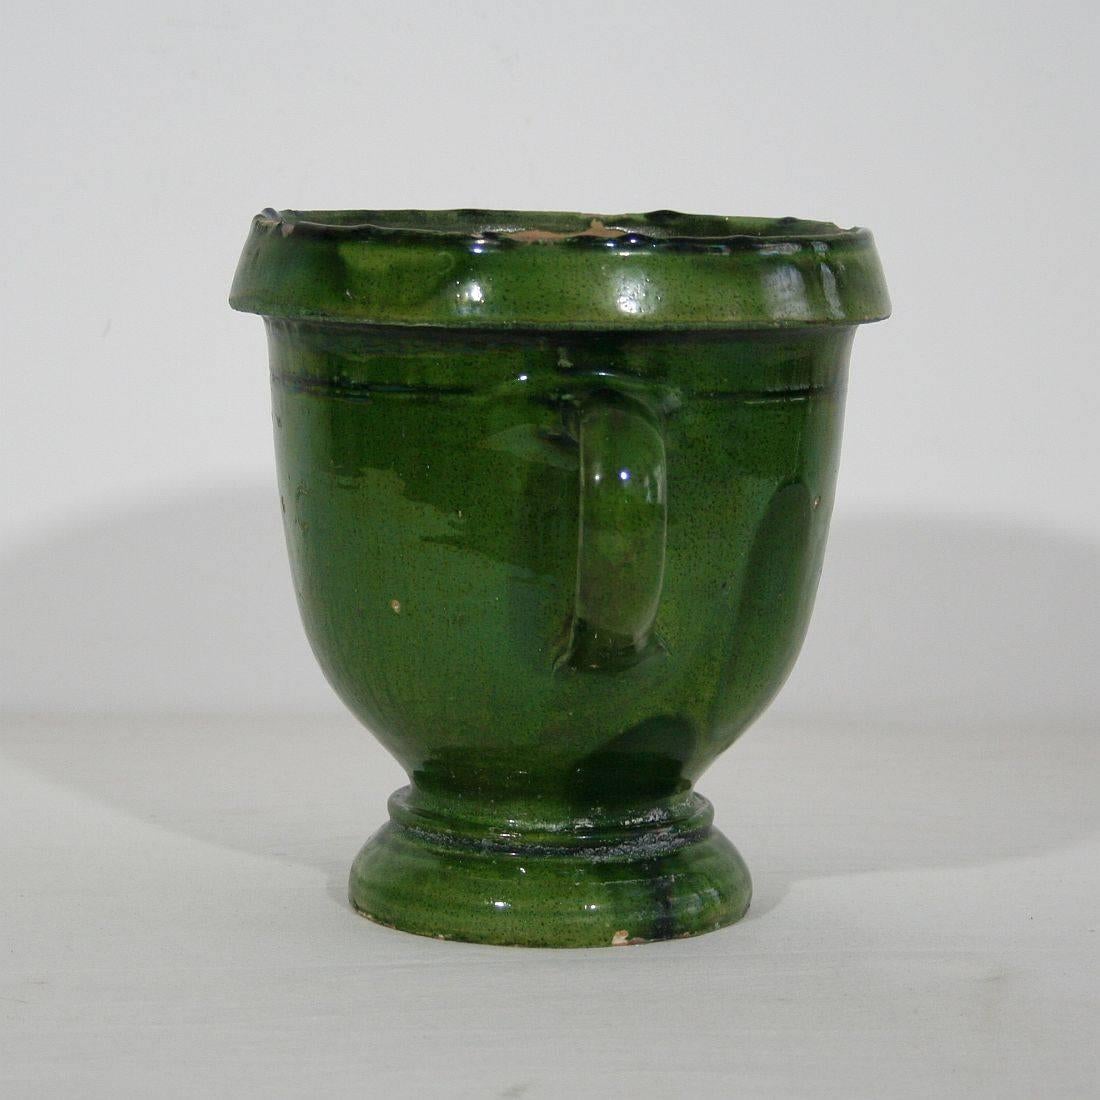 A small French green glazed terra cotta garden urn from Anduze, France. The in and outside of the urn are in a good condition and ready for use in your garden.
 